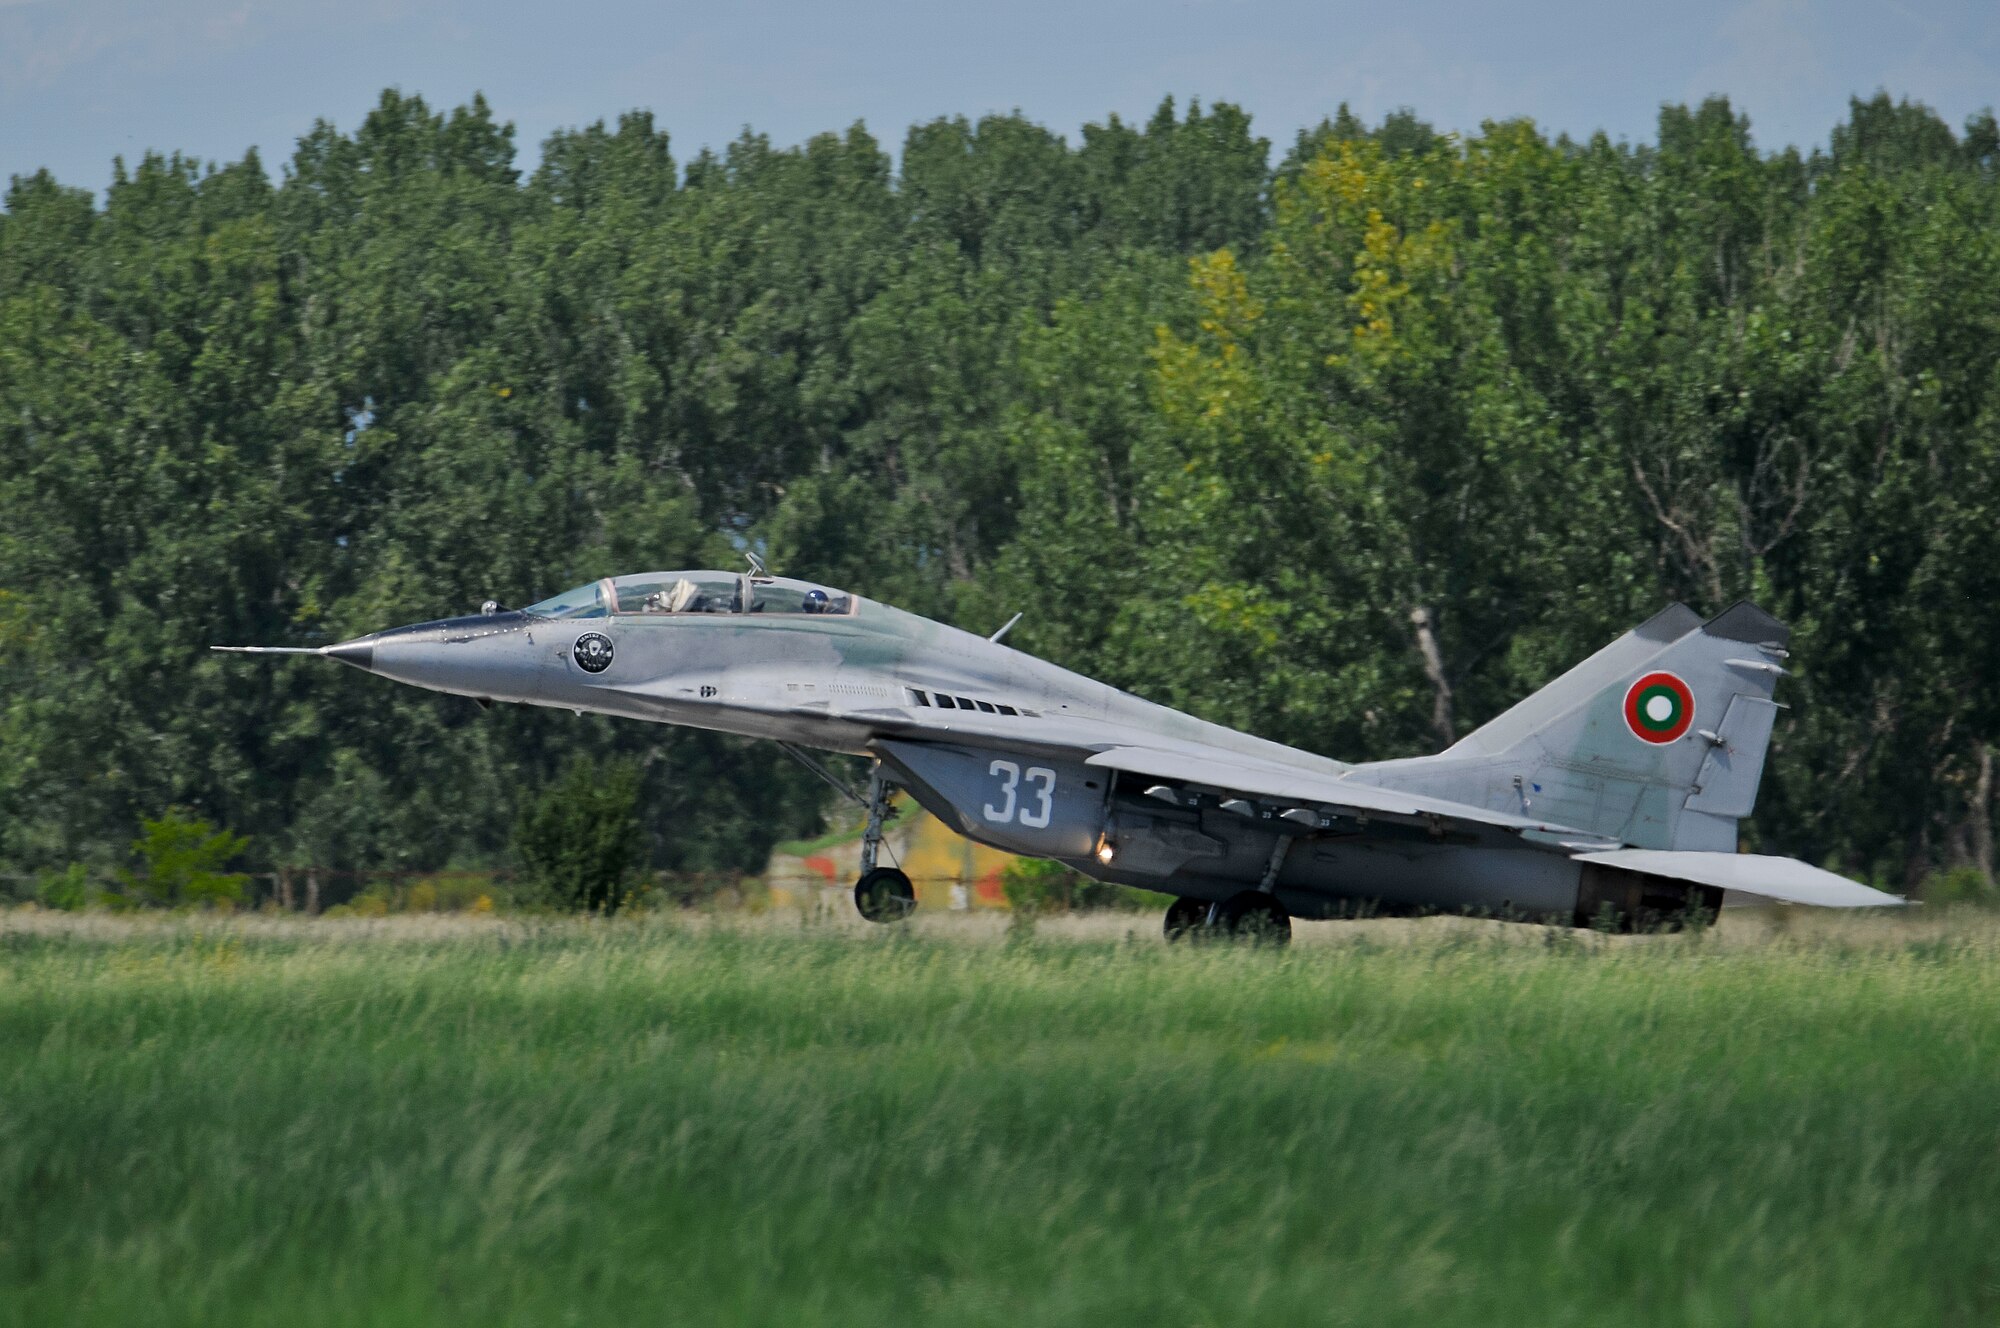 A picture of a Bulgarian air force MiG-29 Fulcrum taking off with a U.S. Air Force F-16 pilot in the back seat.